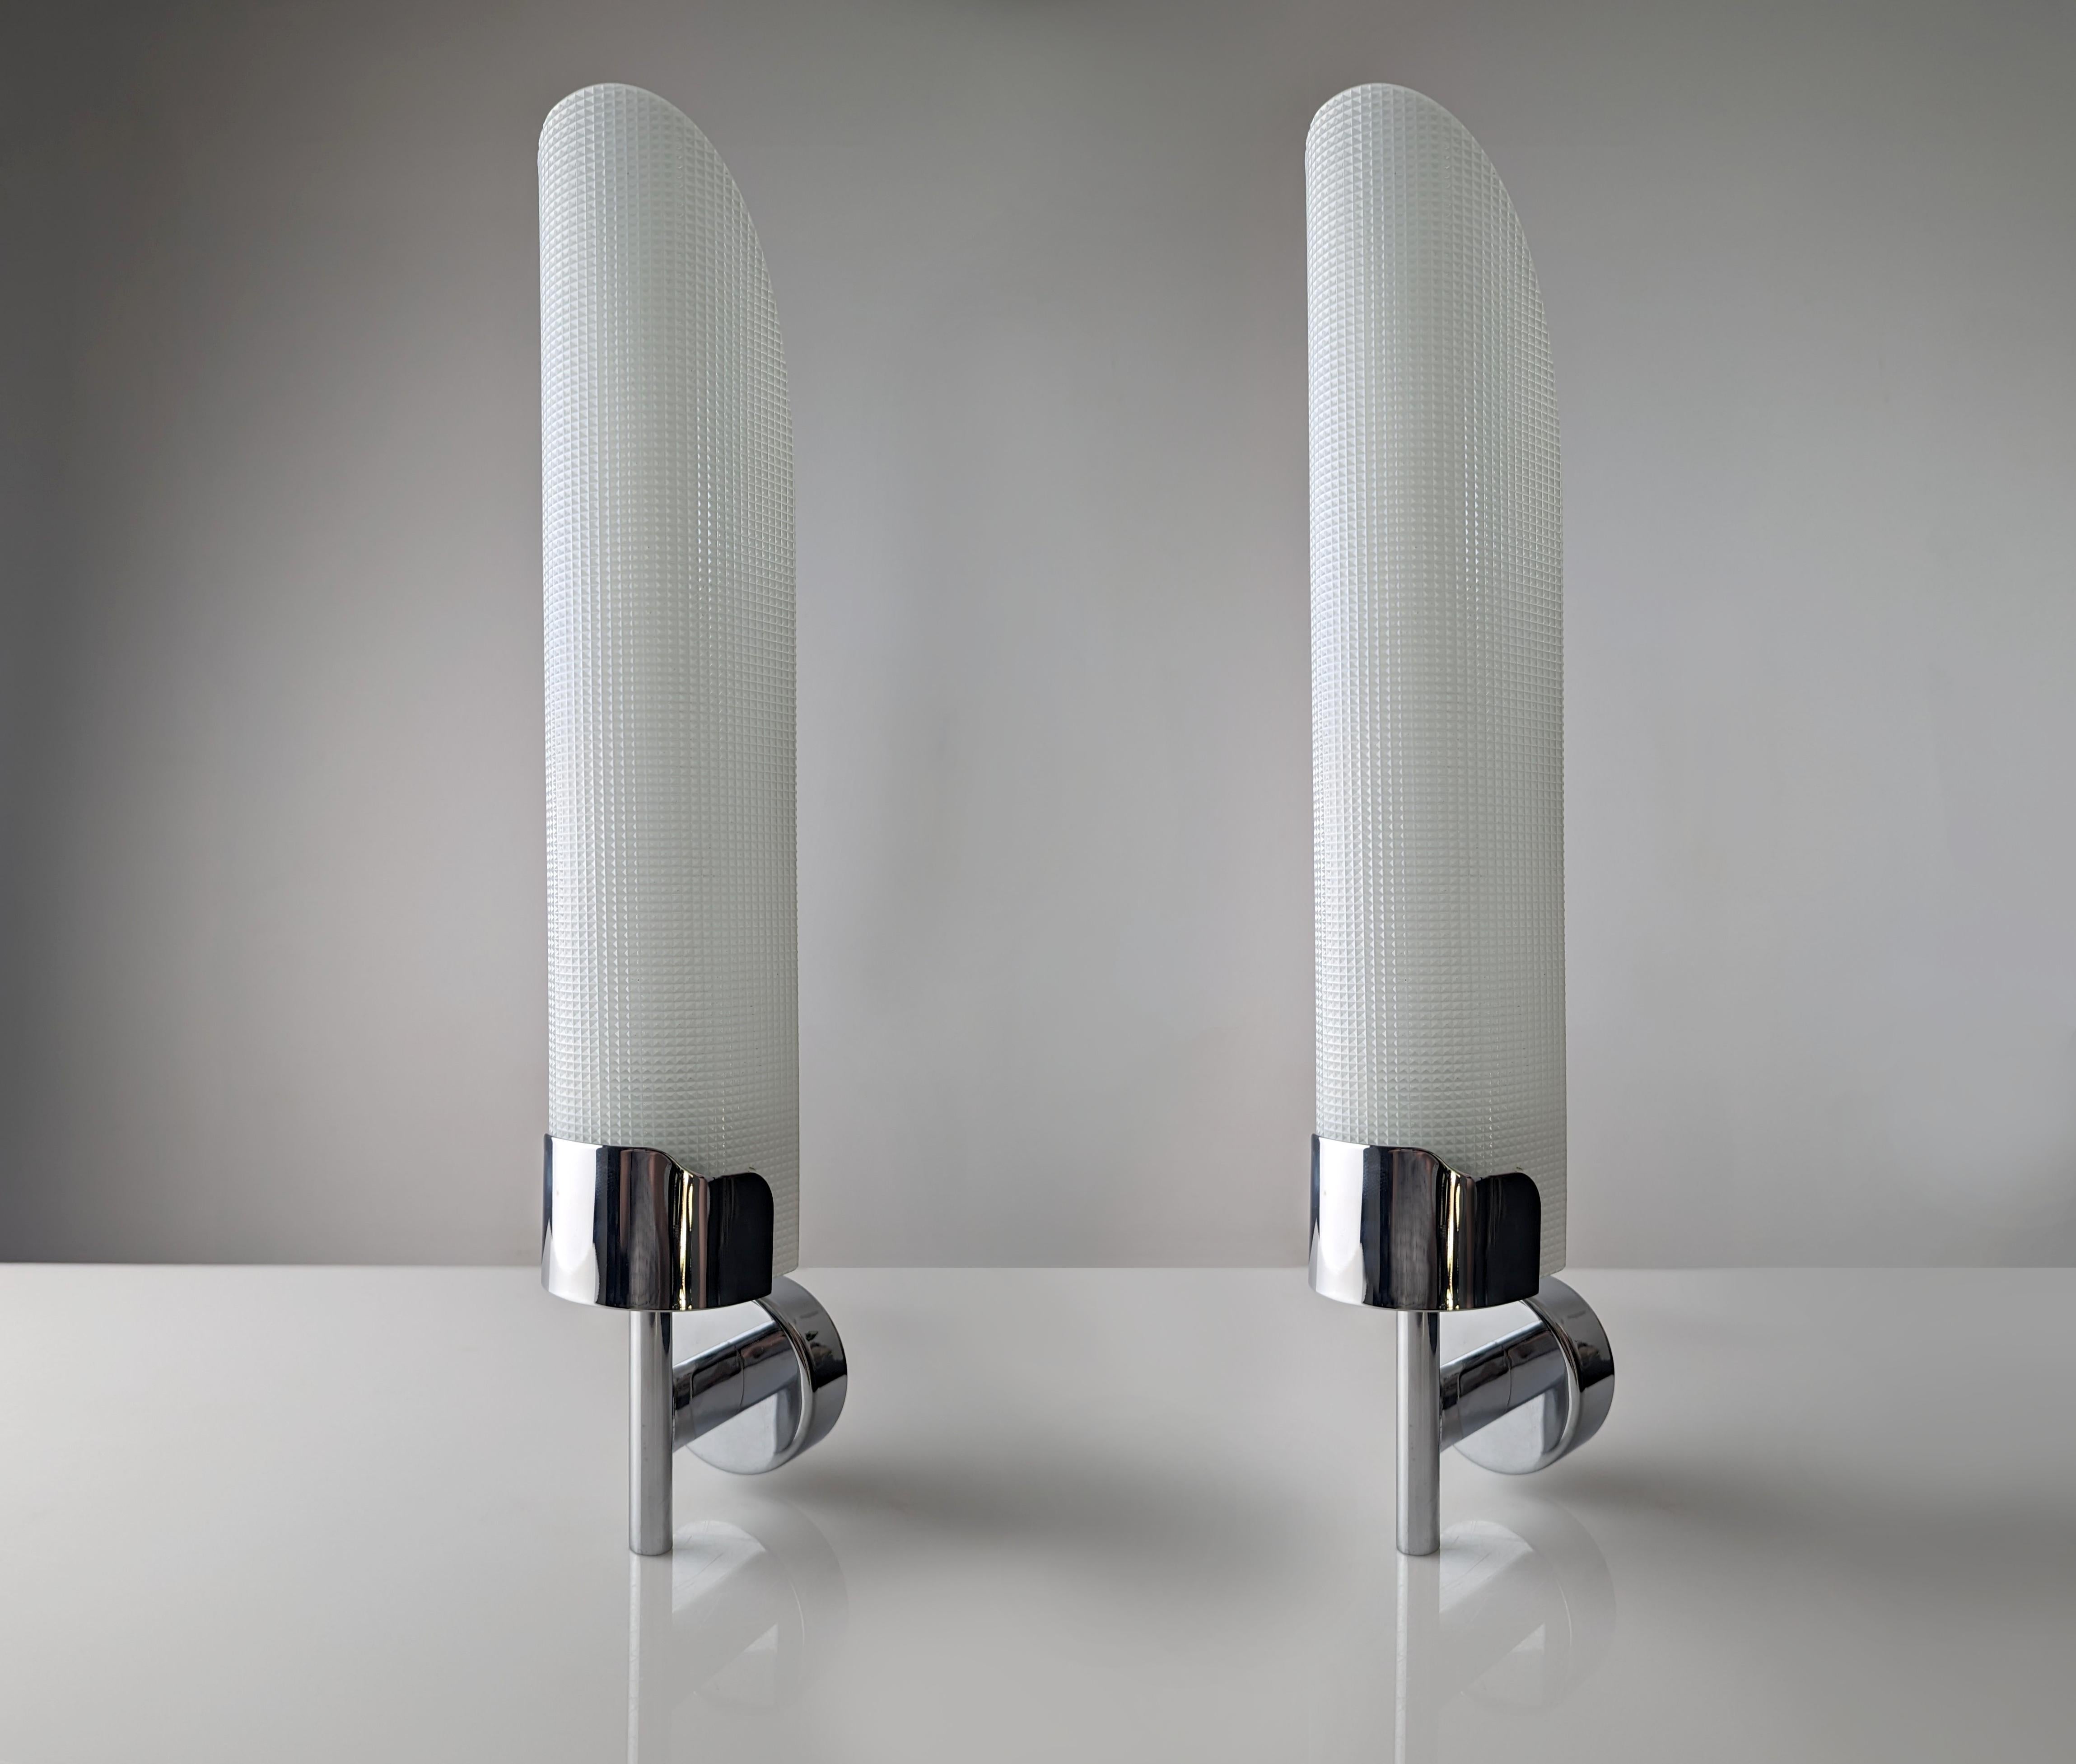 These exclusive Fontana Arte Model 2080 sconces were designed by Max Ingrand and made in Italy in 1955. It is an exclusive reissue from the 80s where they raised the height to an incredible 50 cm compared to the 40 cm of the original designs.

With